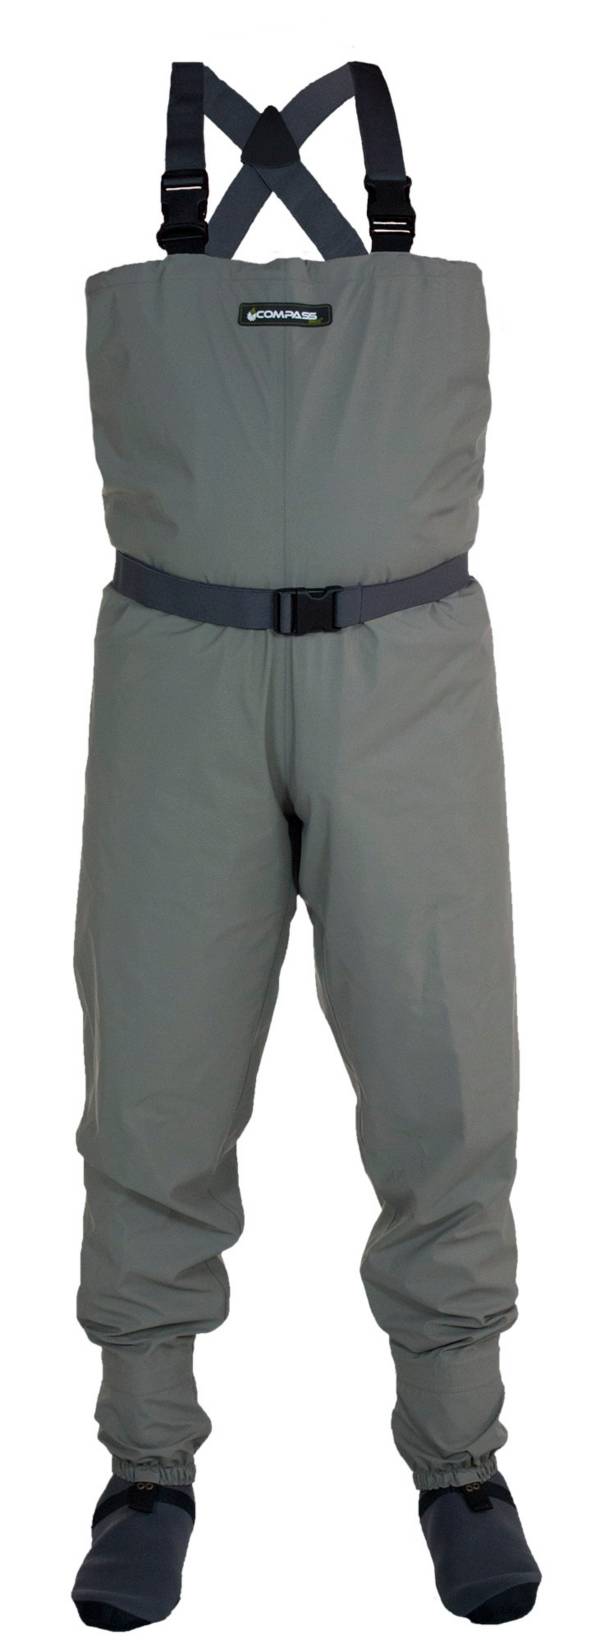 Compass 360 Youth Stillwater Stockingfoot Wader product image